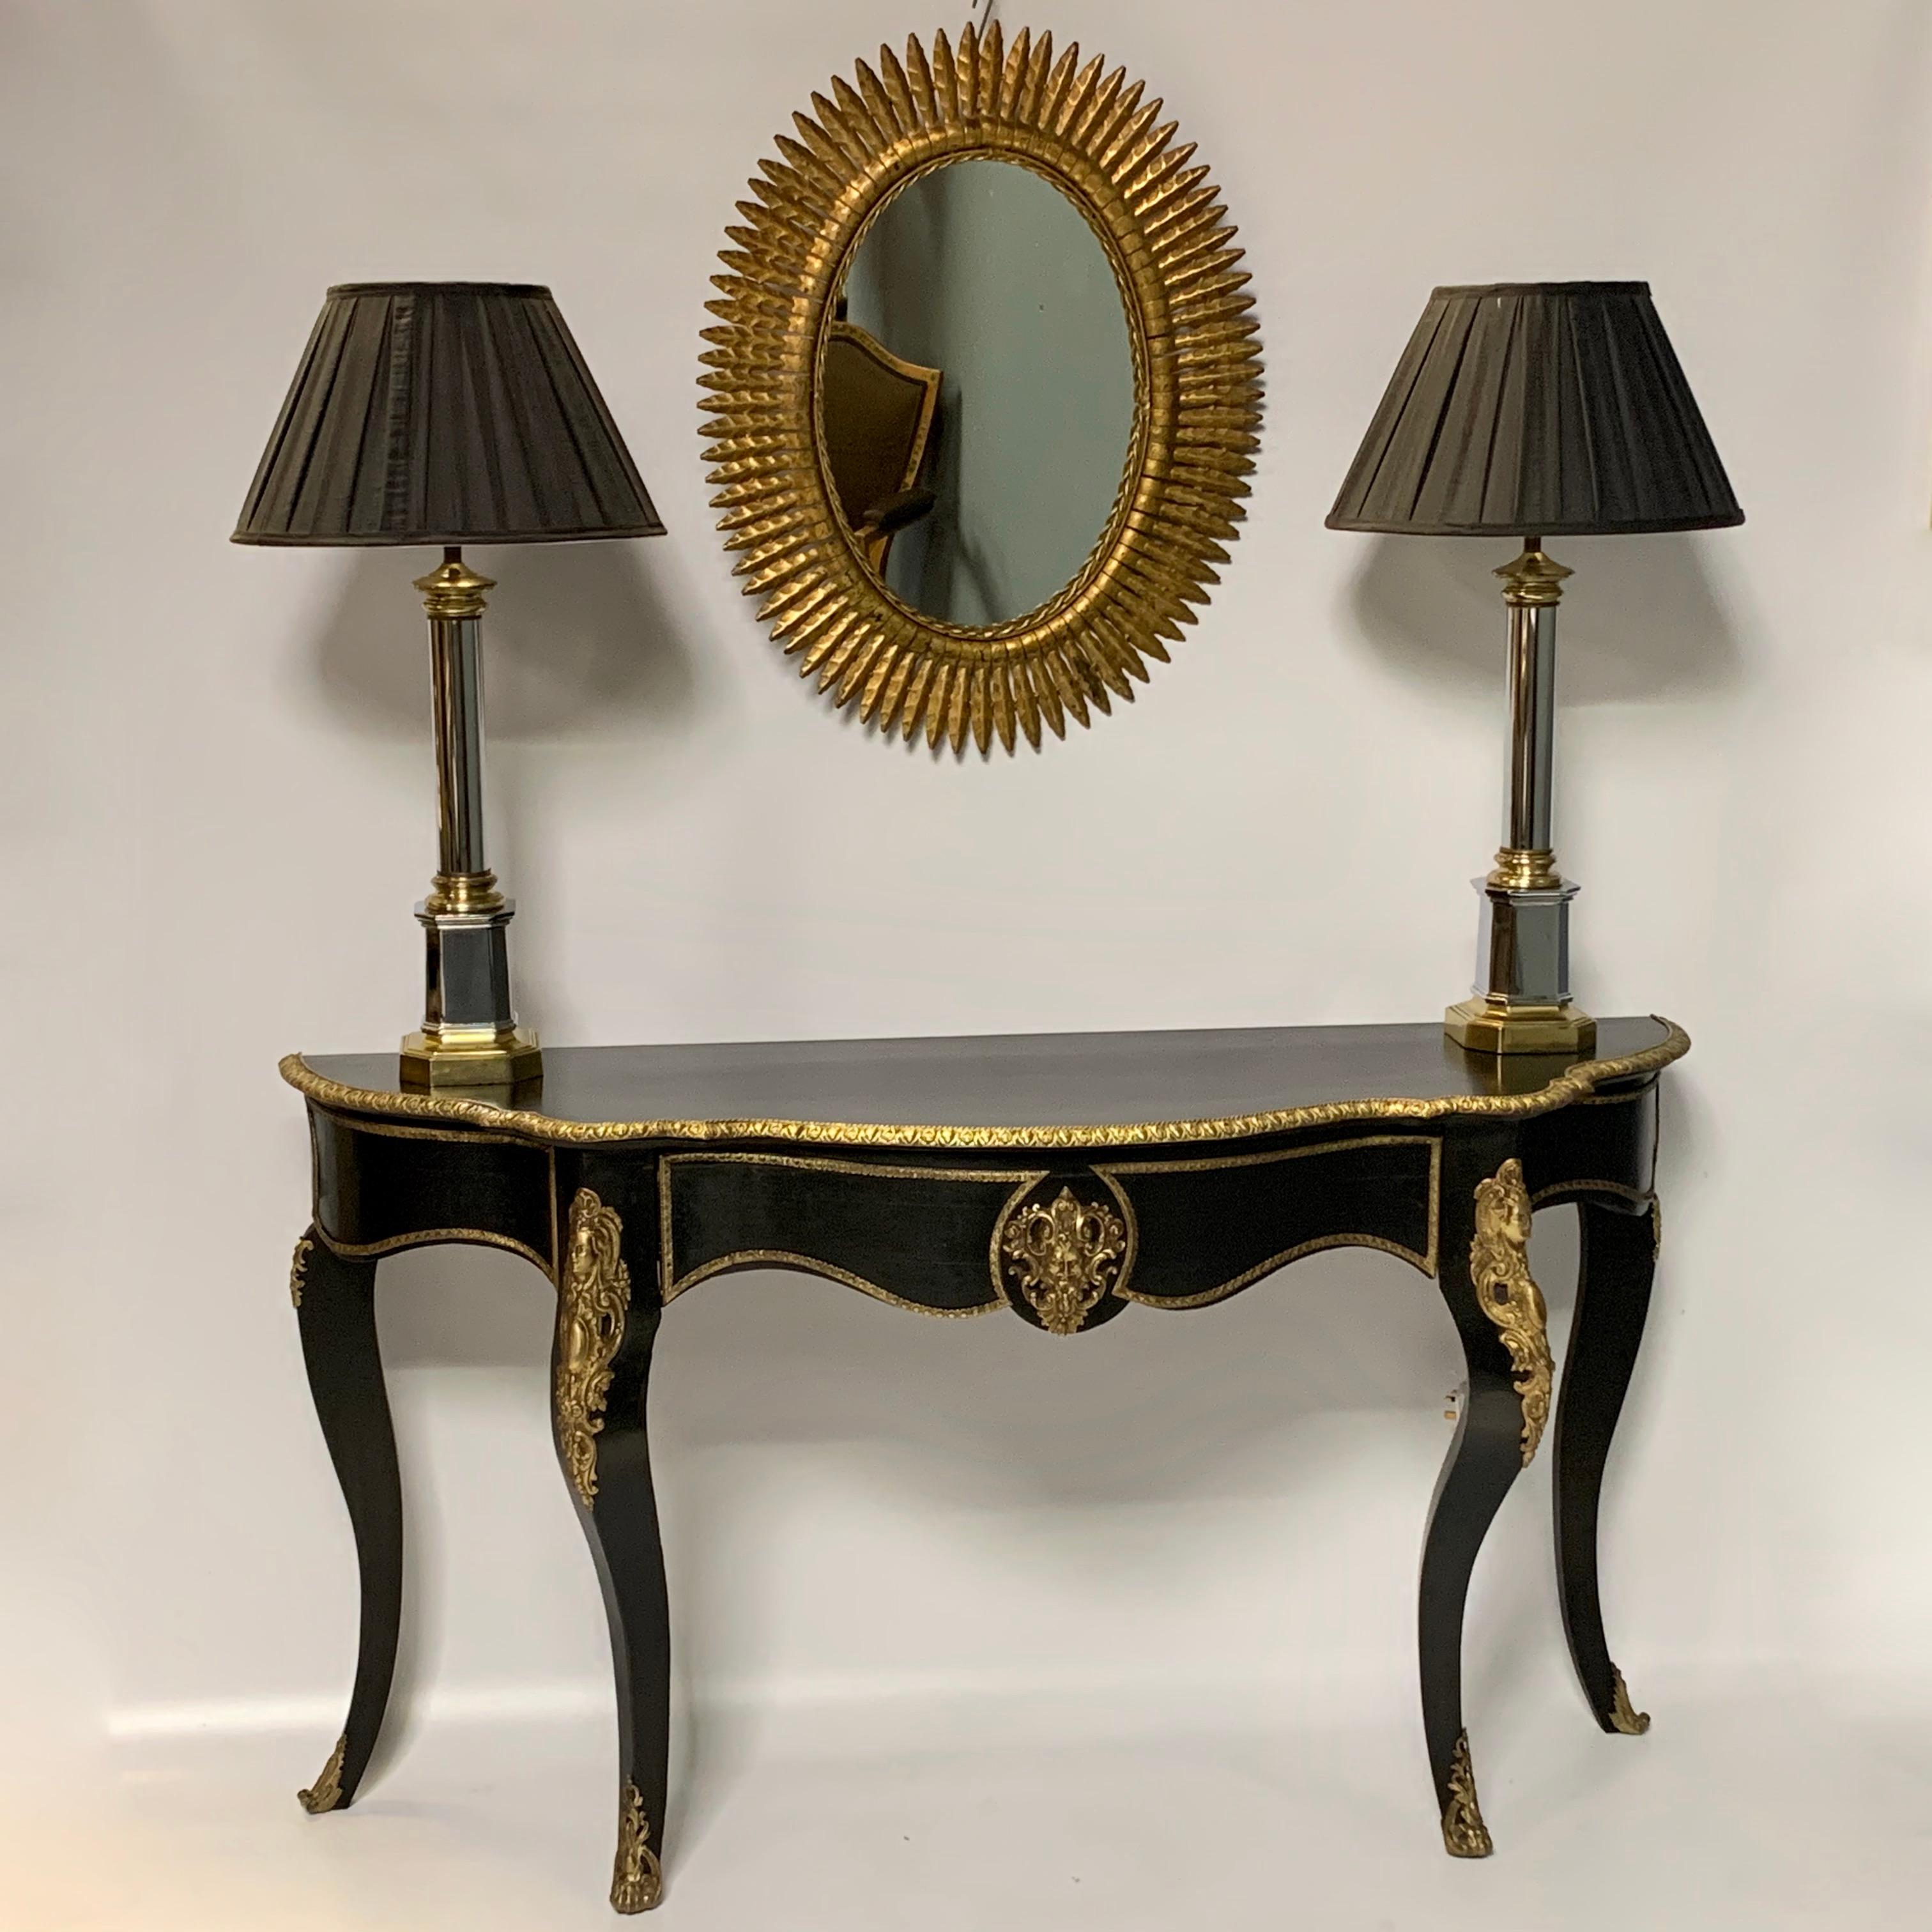 Very decorative Spanish gilt metal oval wall mirror with a really good clean and bright gilt finish.
Lovely size and will hang well over a chest or console table as shown below for proportions.
Not a heavy mirror, so you can hang it easily from a